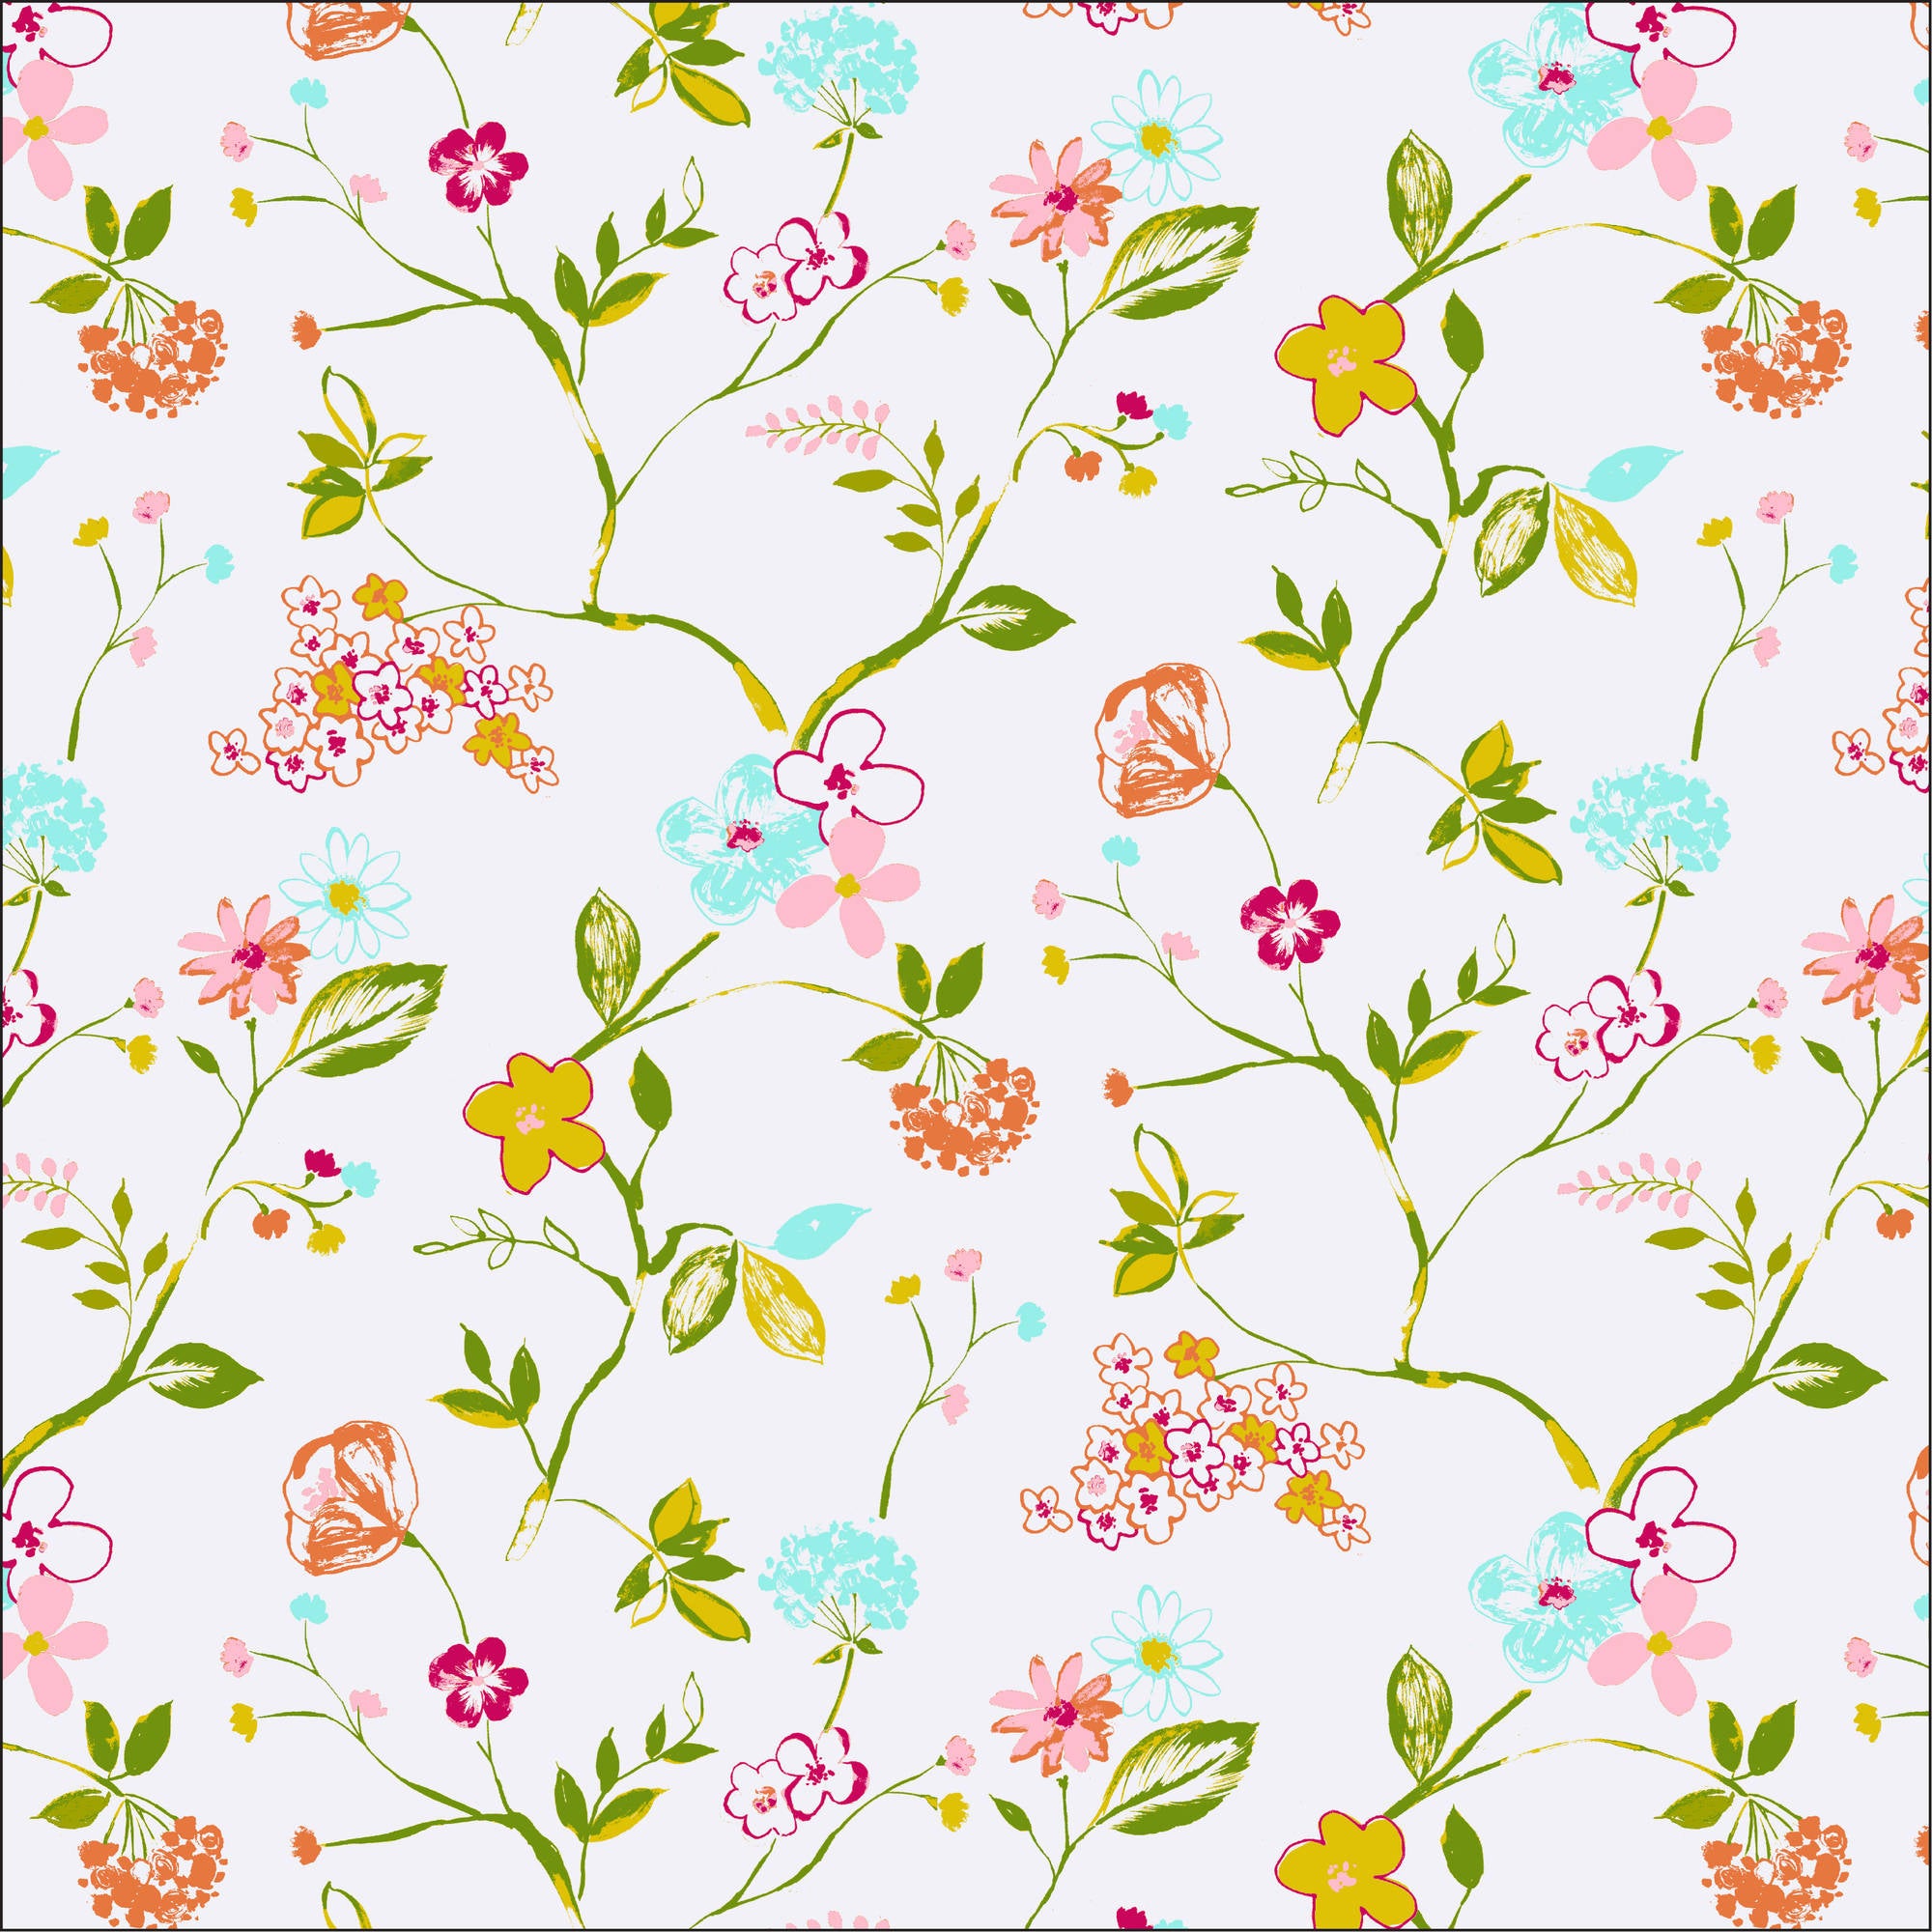 Waverly Inspirations Cotton 44" Sketch Flower Magic Color Sewing Fabric by the Yard